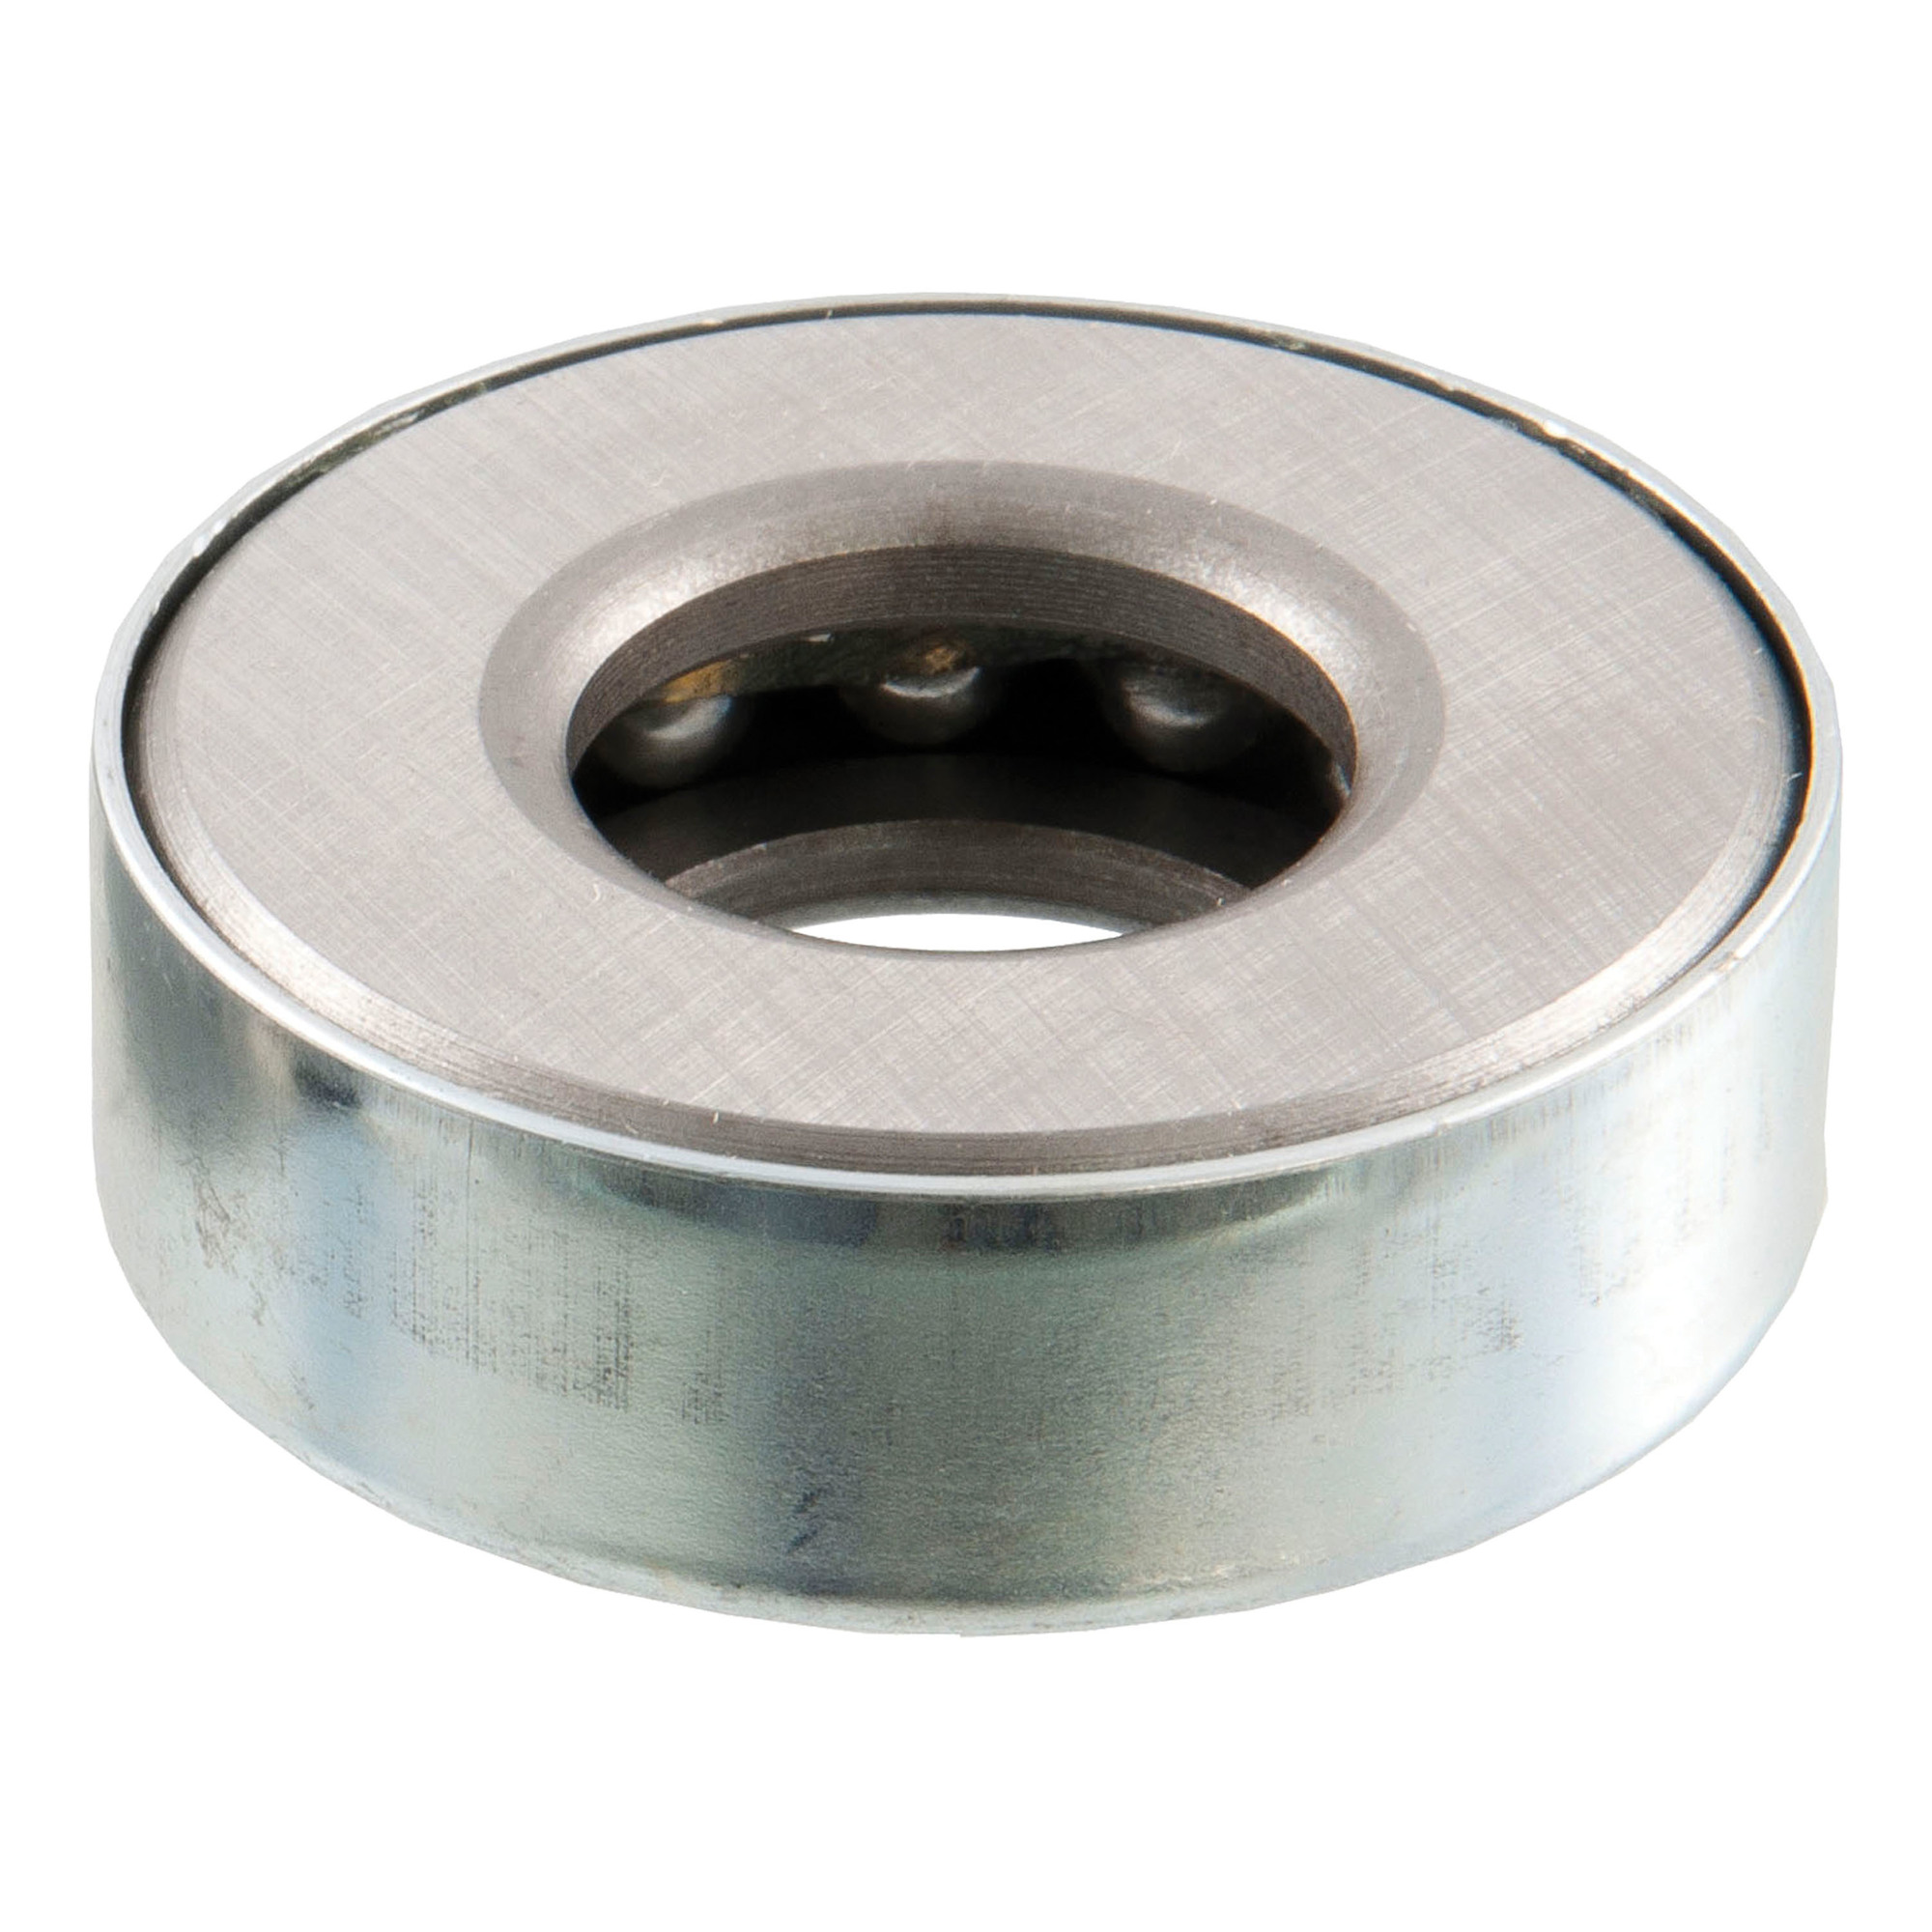 Curt Manufacturing, Replacement Direct-Weld Square Jack Bearing, Model 28954